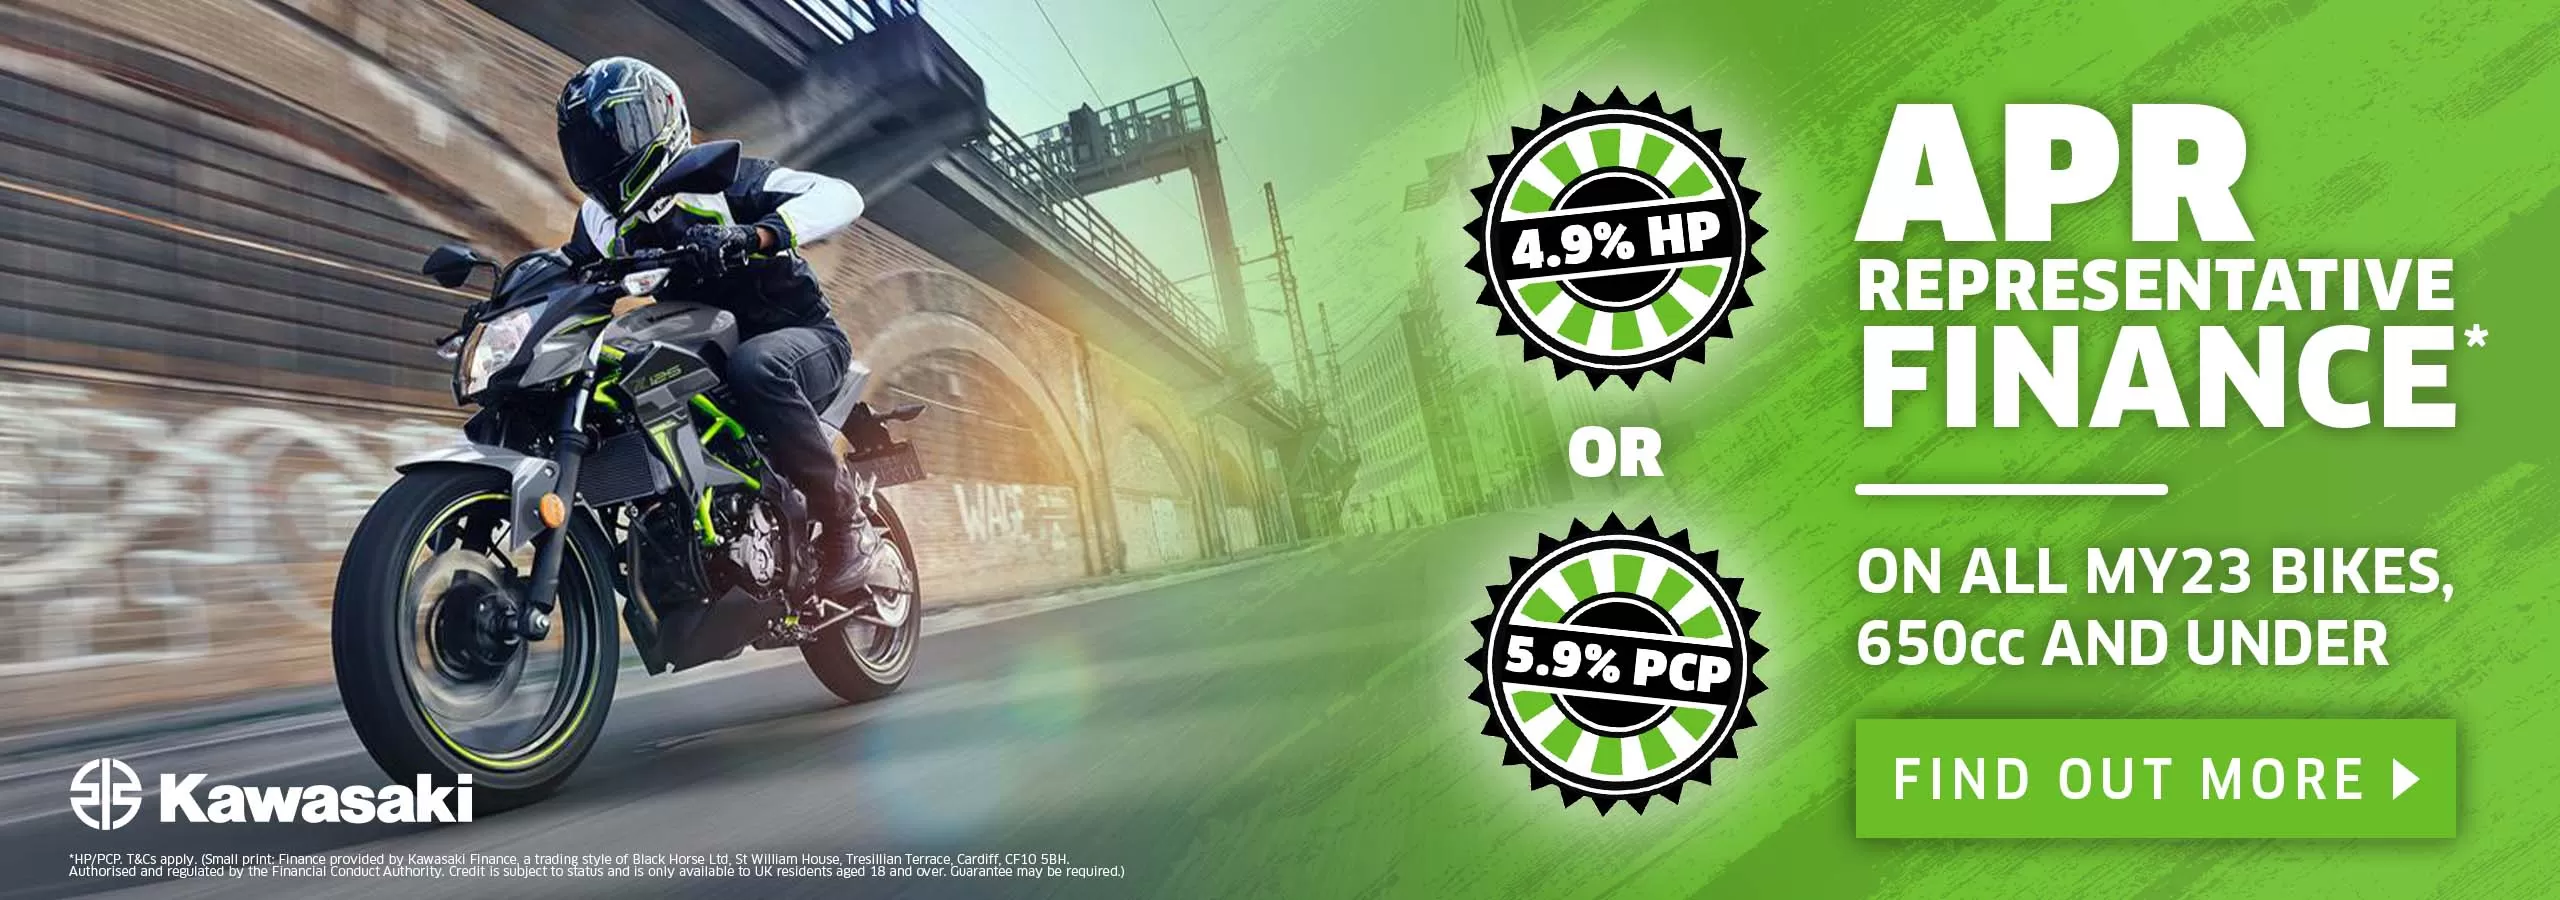 New finance offer available with selected MY23 Kawasaki motorcycles